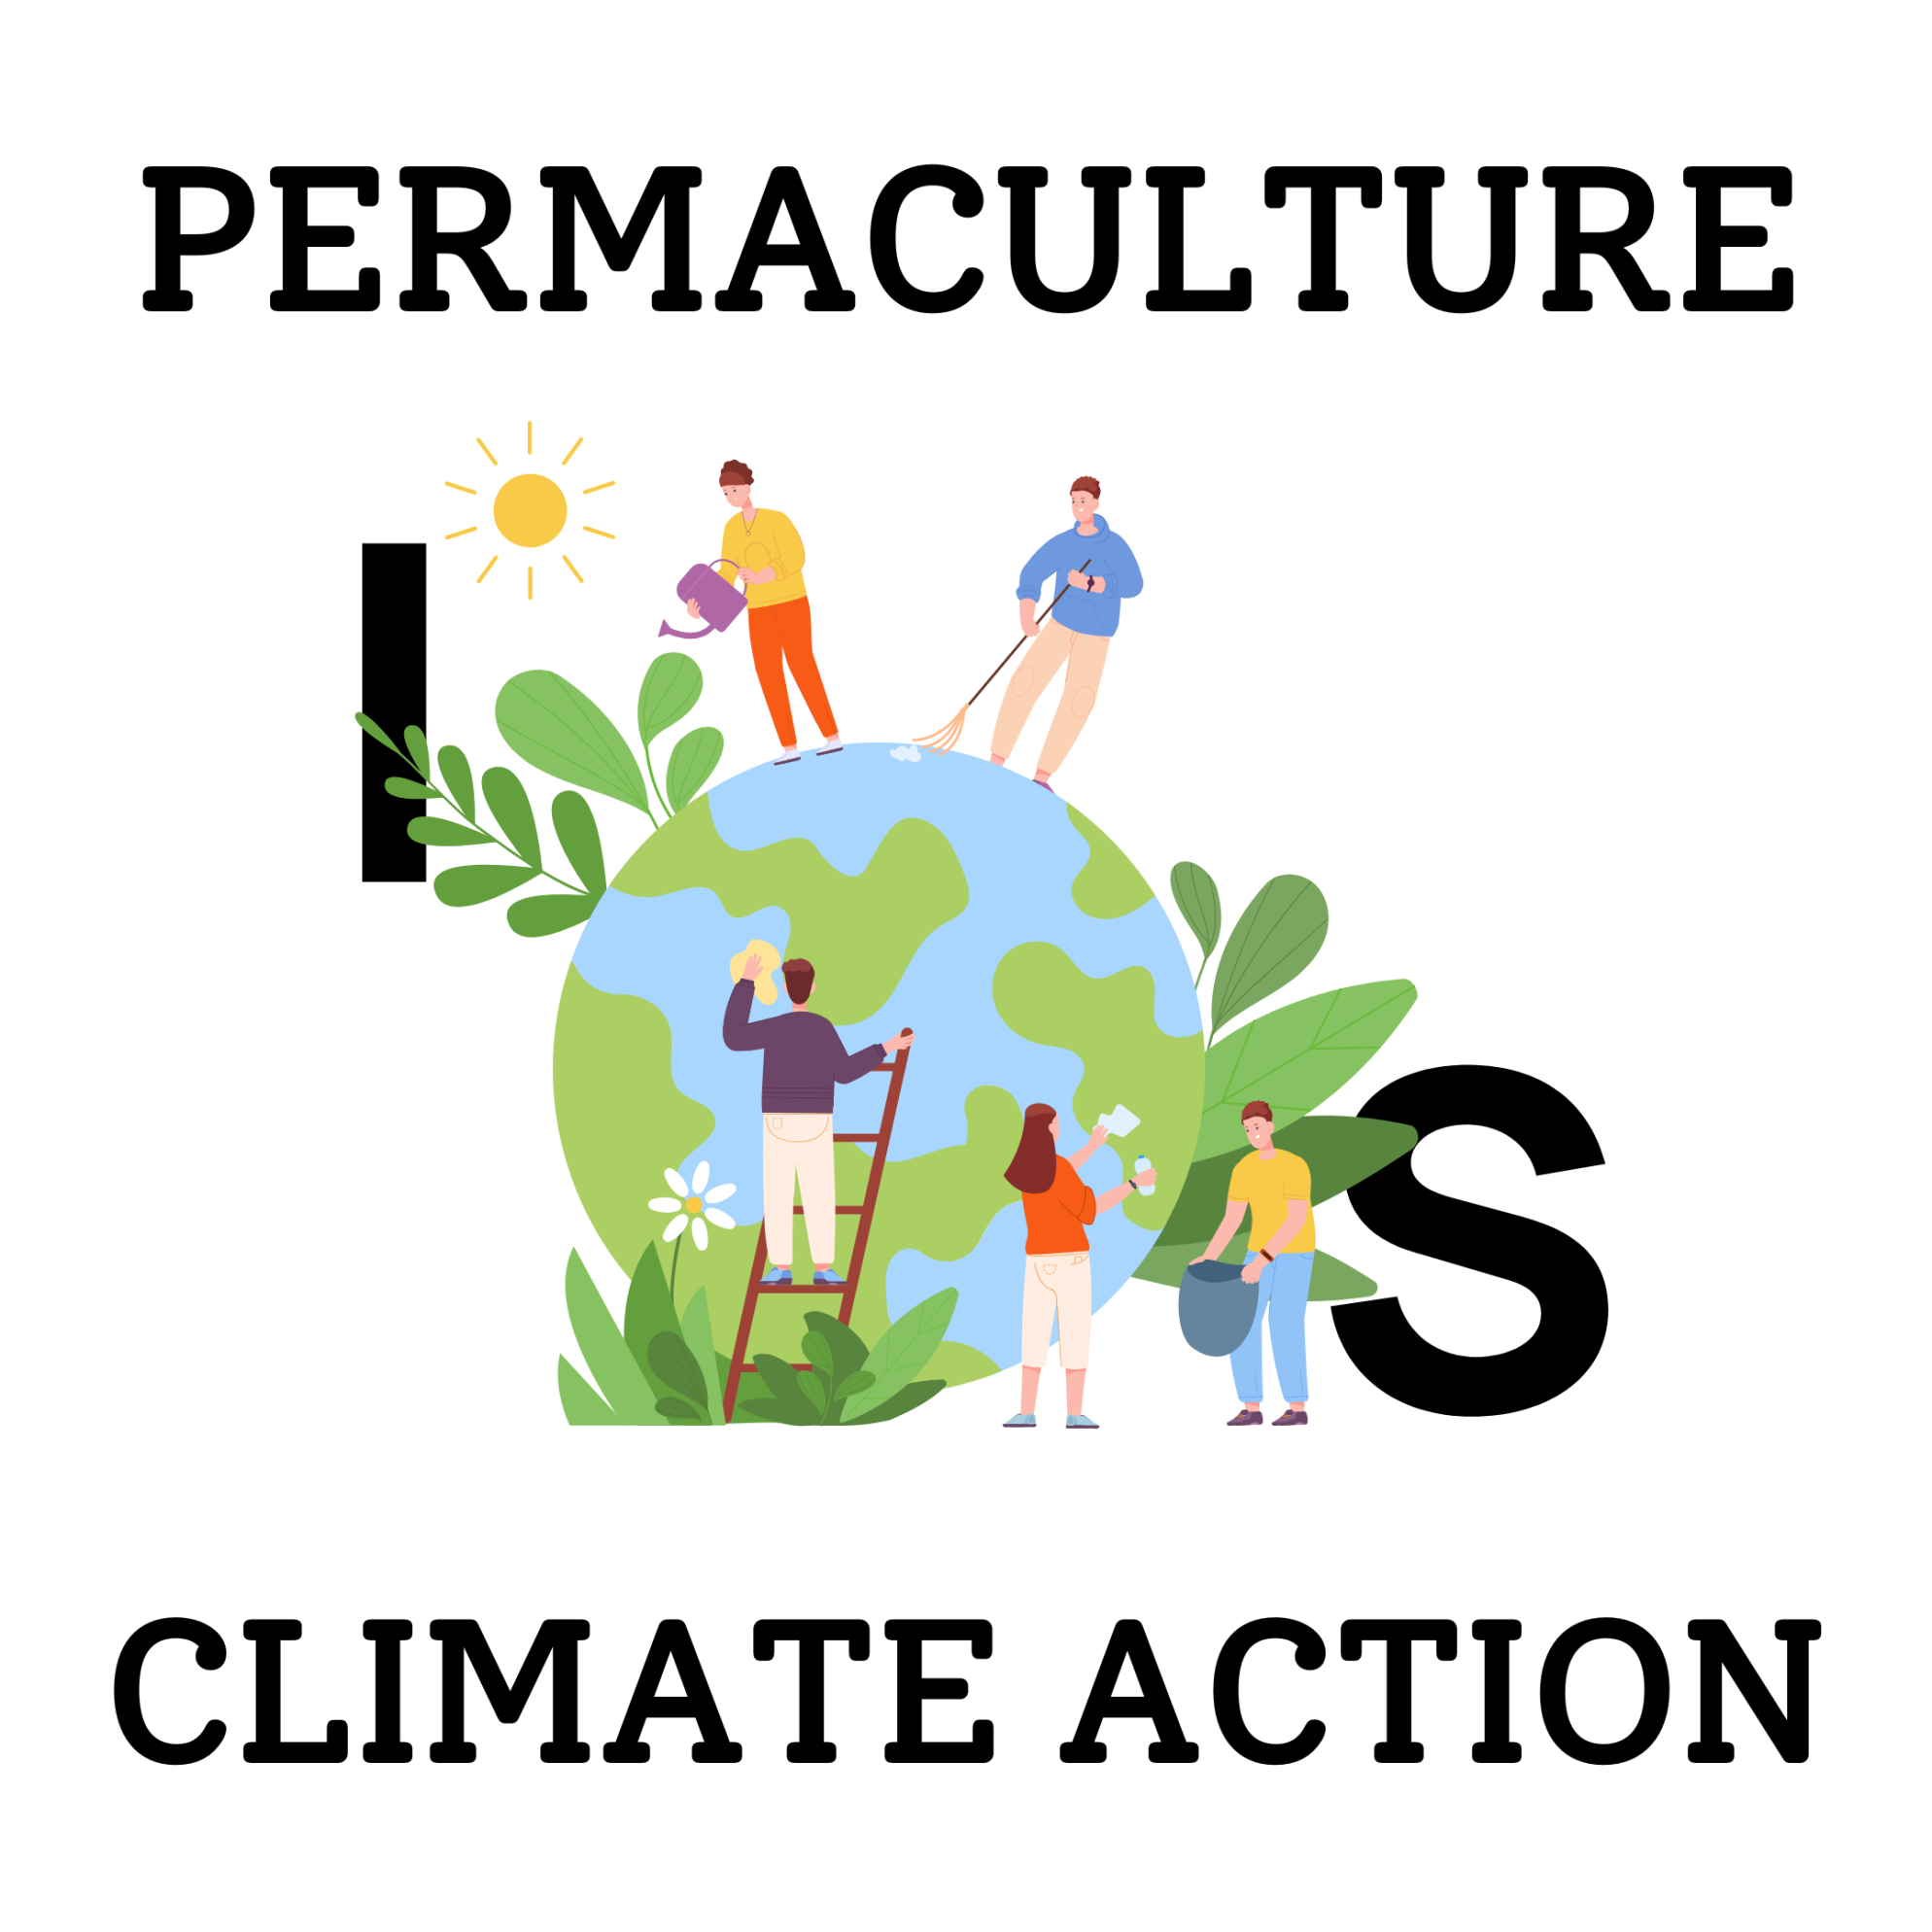 Permaculture is climate action